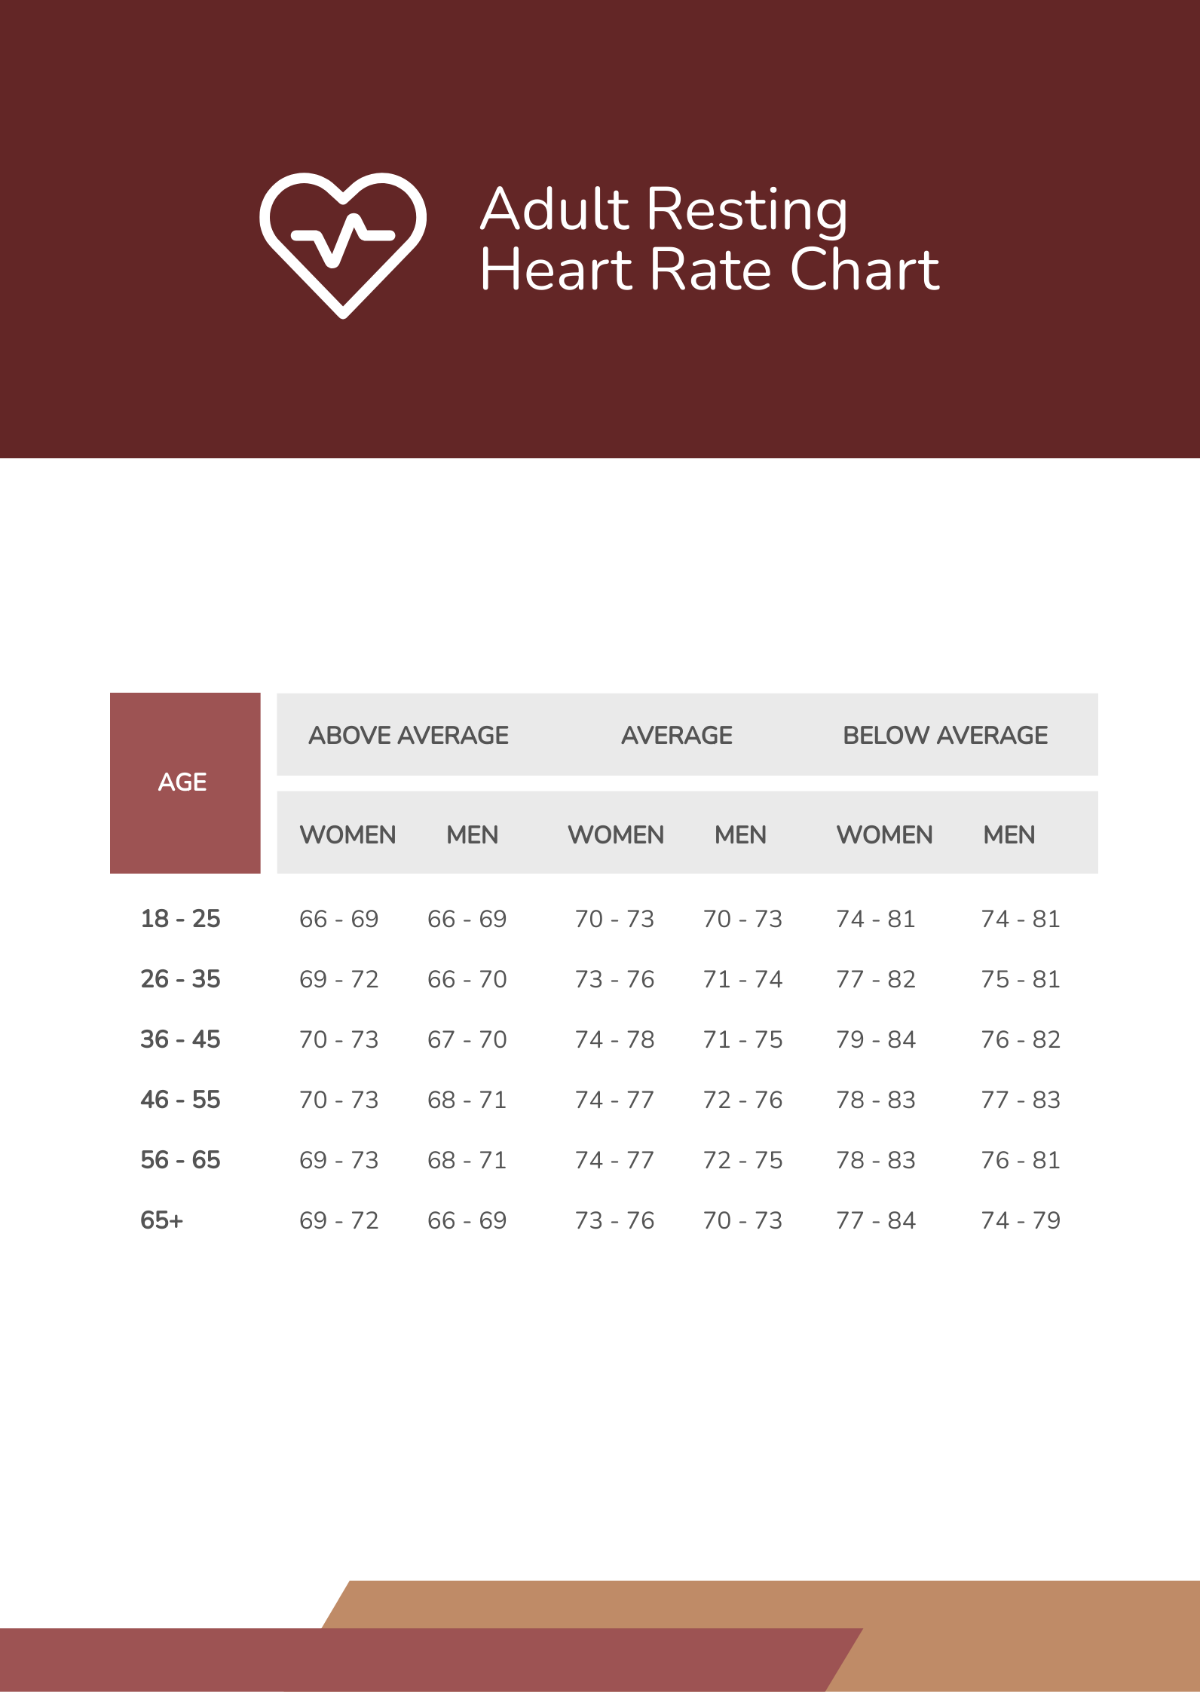 Adult Resting Heart Rate Chart Template